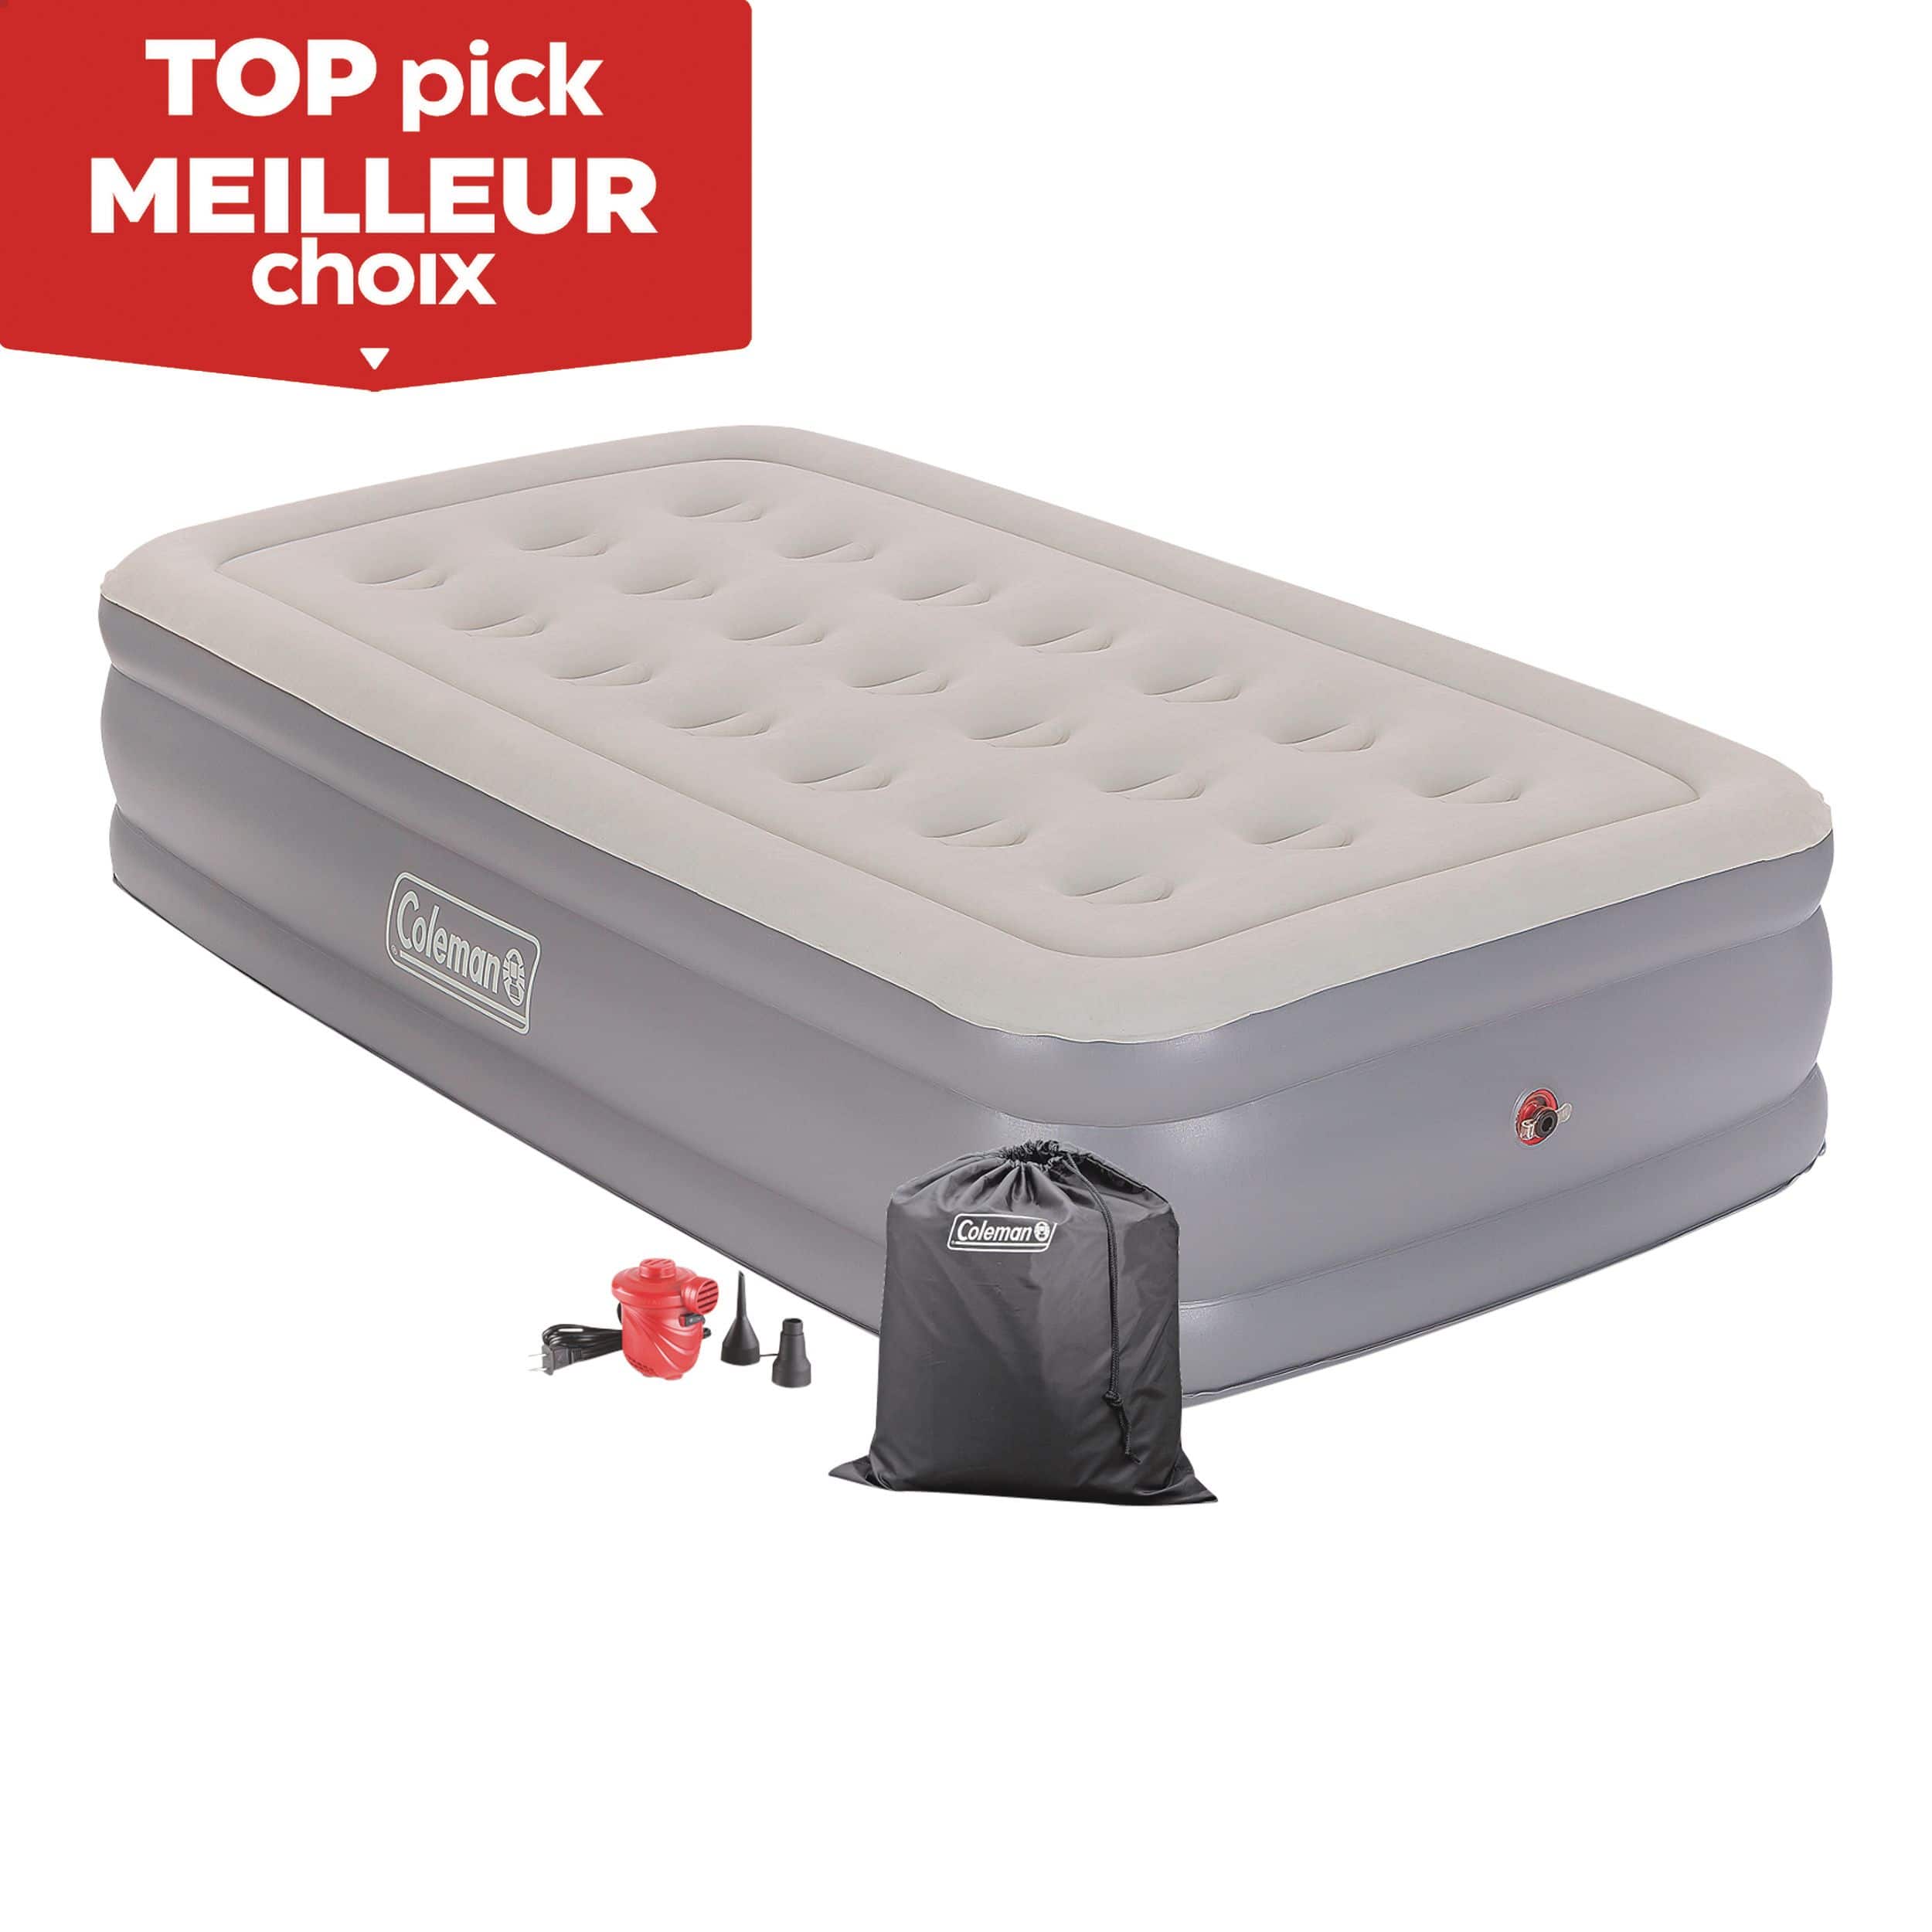 https://media-www.canadiantire.ca/product/playing/camping/camping-furniture/0762820/coleman-double-high-airbed-with-pump-twin-99c5b041-274a-4981-98af-831a44630fe7-jpgrendition.jpg